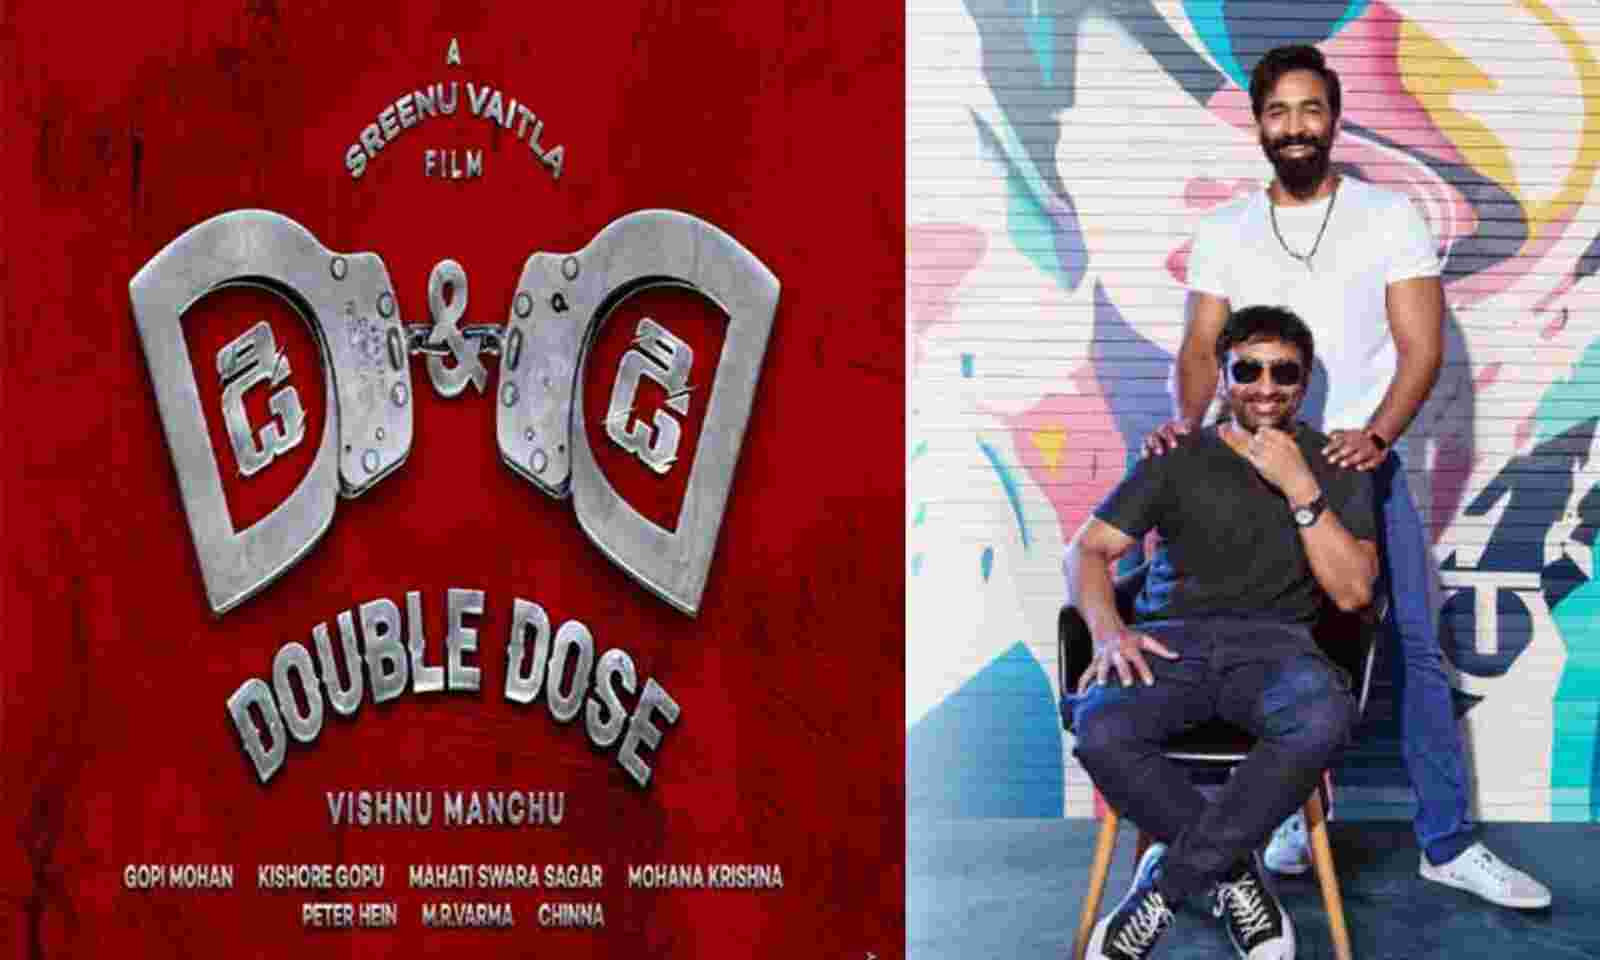 Dhee sequel titled as &#39;Double Dose&#39;